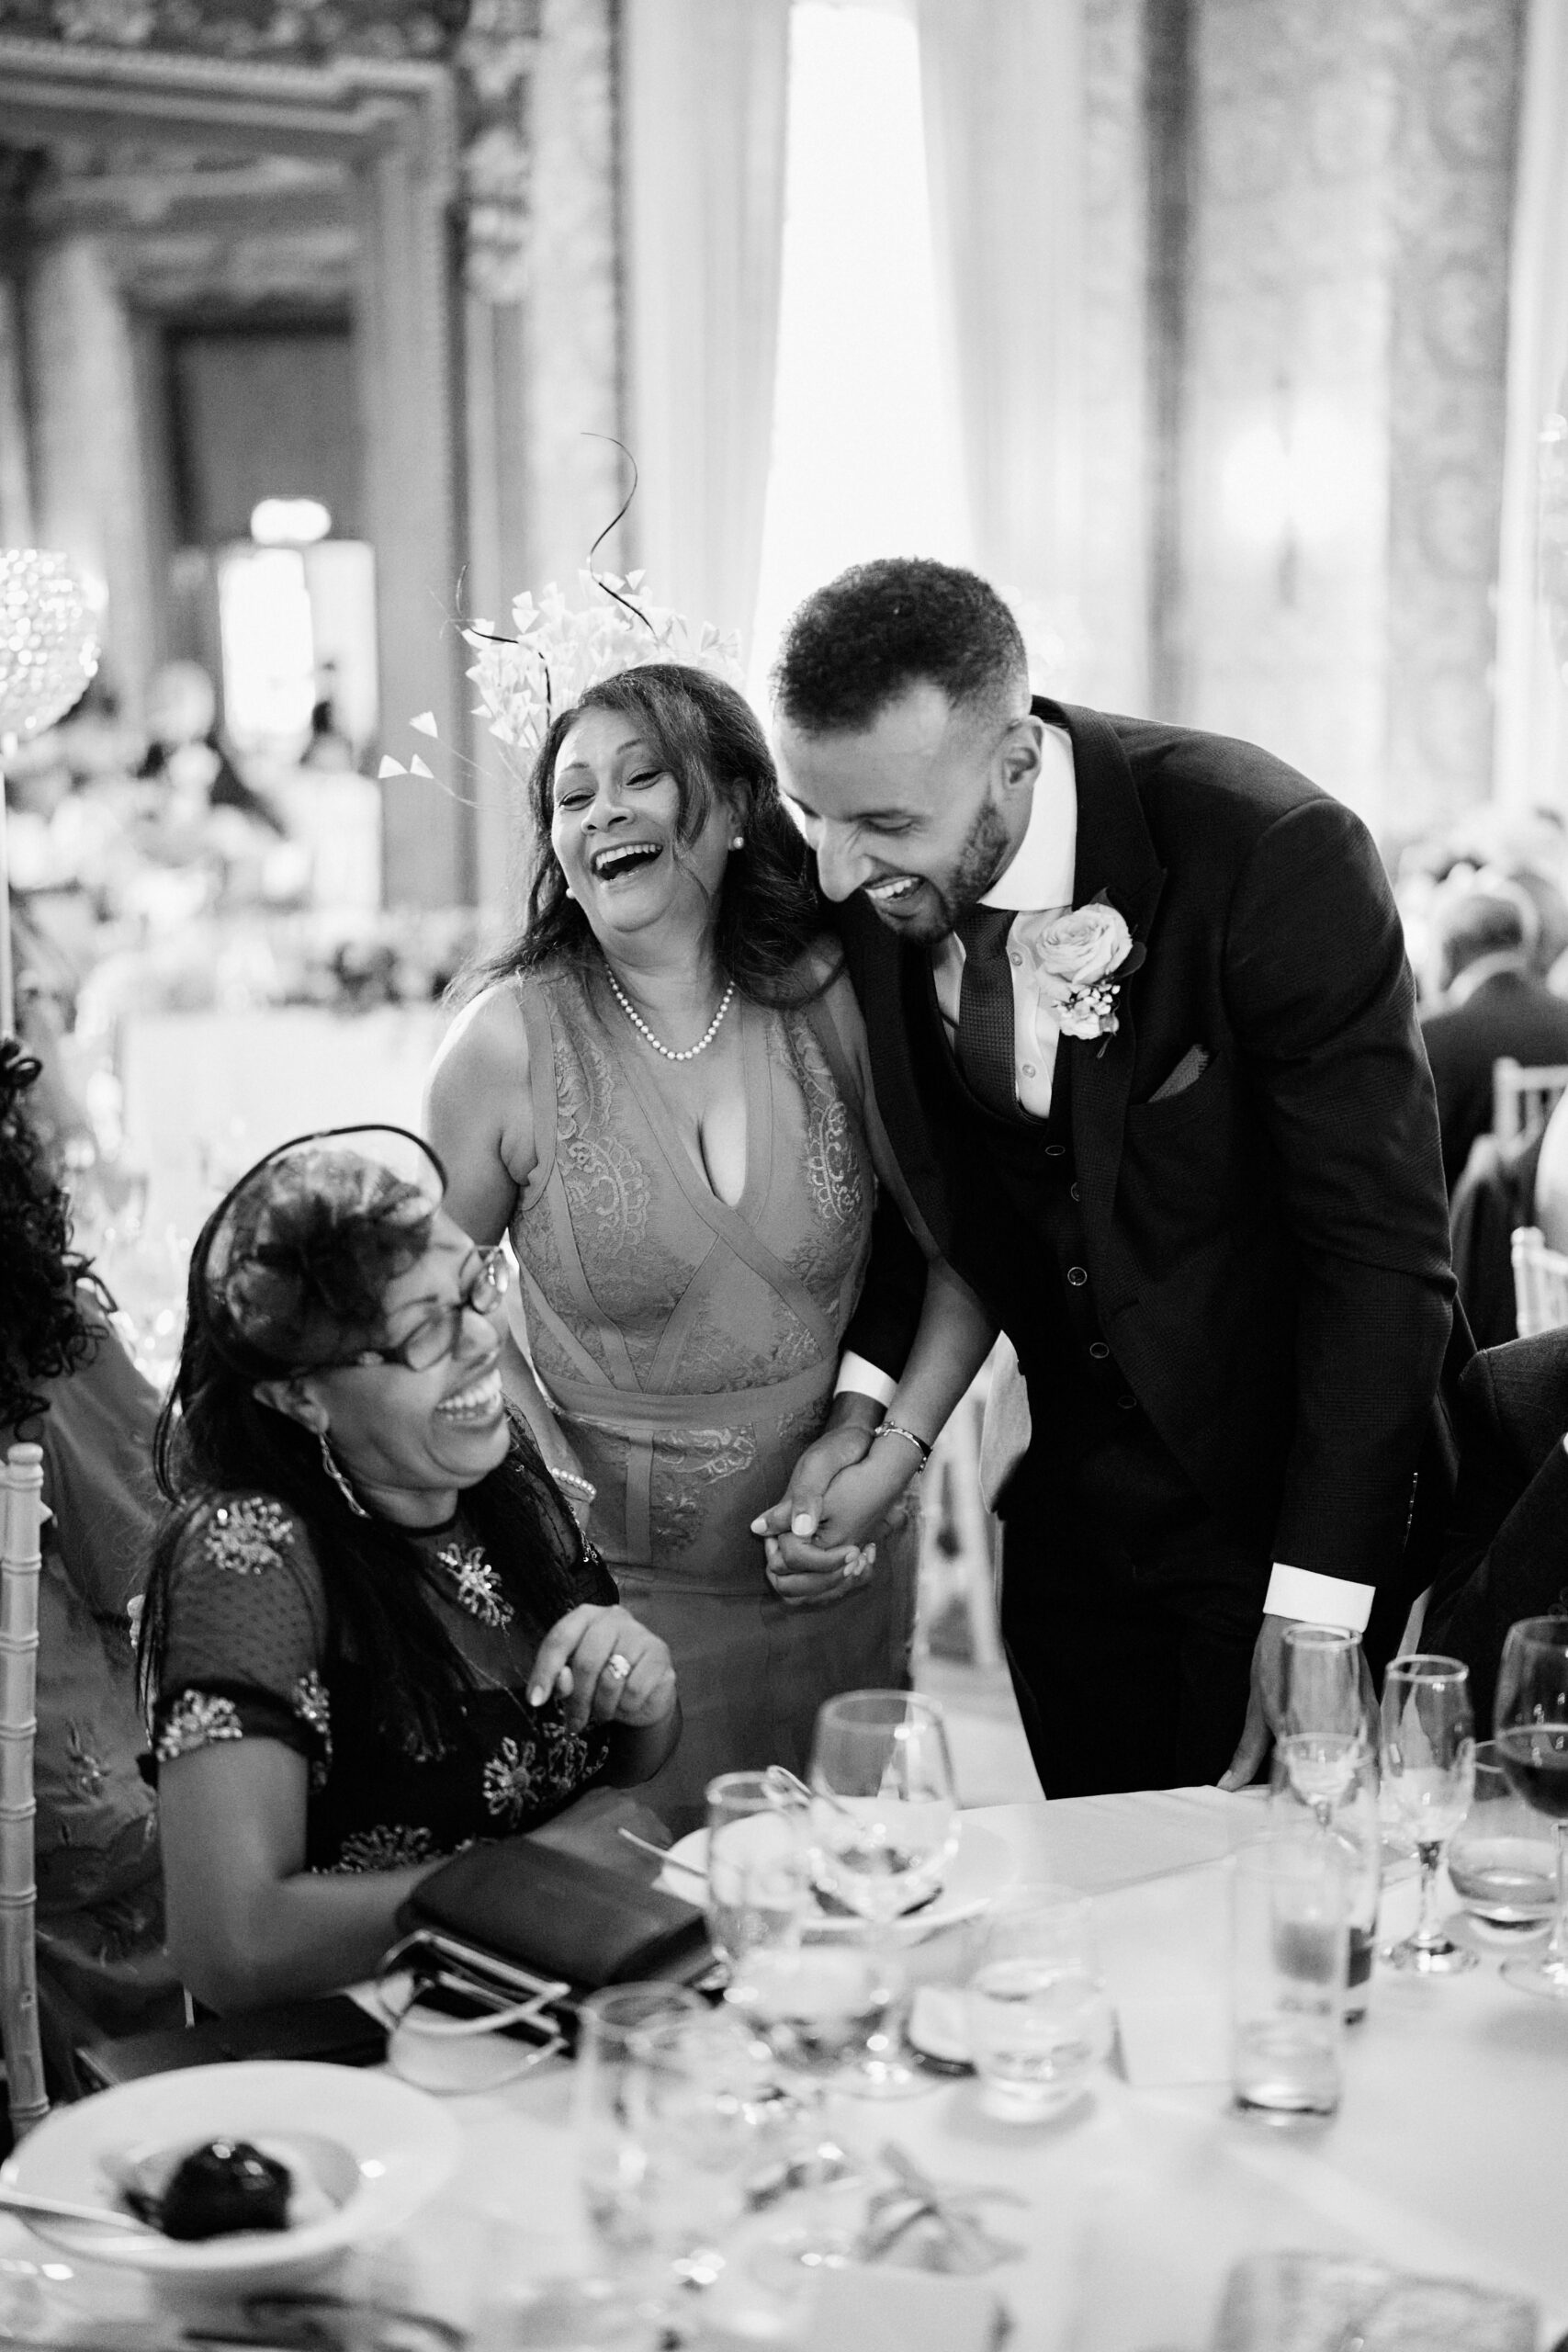 A black and white picture of some folks at a wedding.